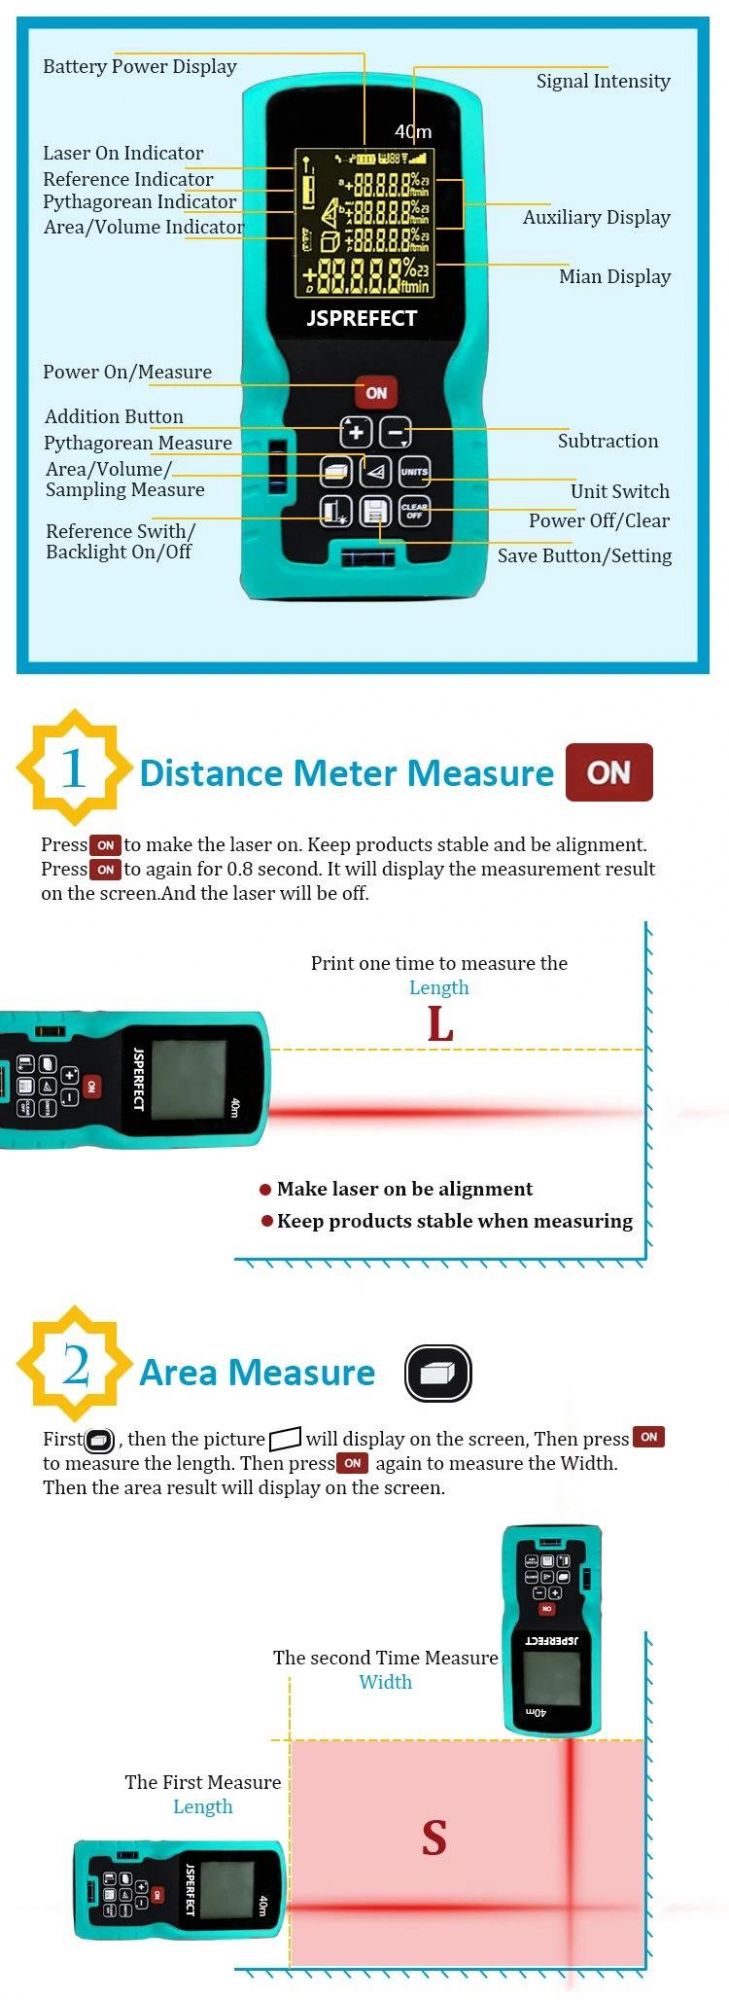 40m Area Best China Most Accurate Laser Range Finder